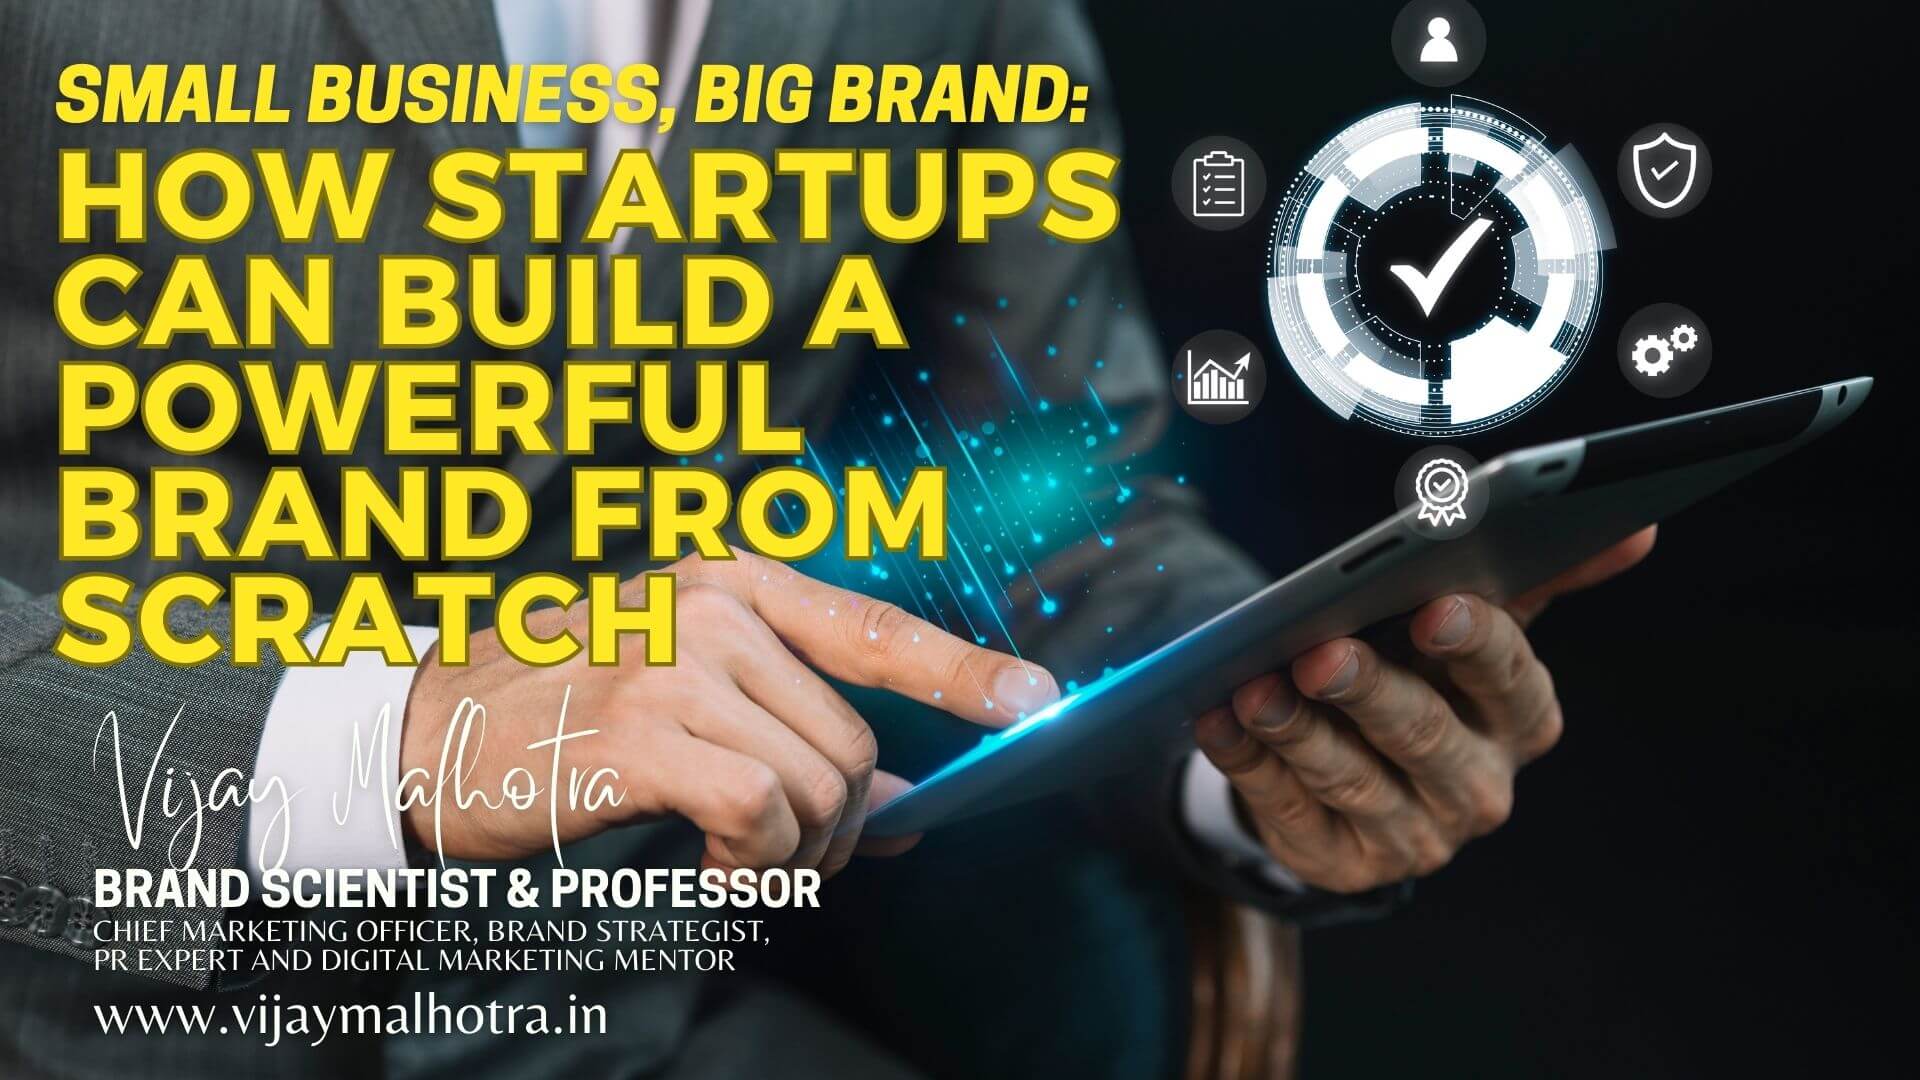 Small Business Big Brand How Startups can build a powerful brand from Scratch by Vijay Malhotra Brand Scientist